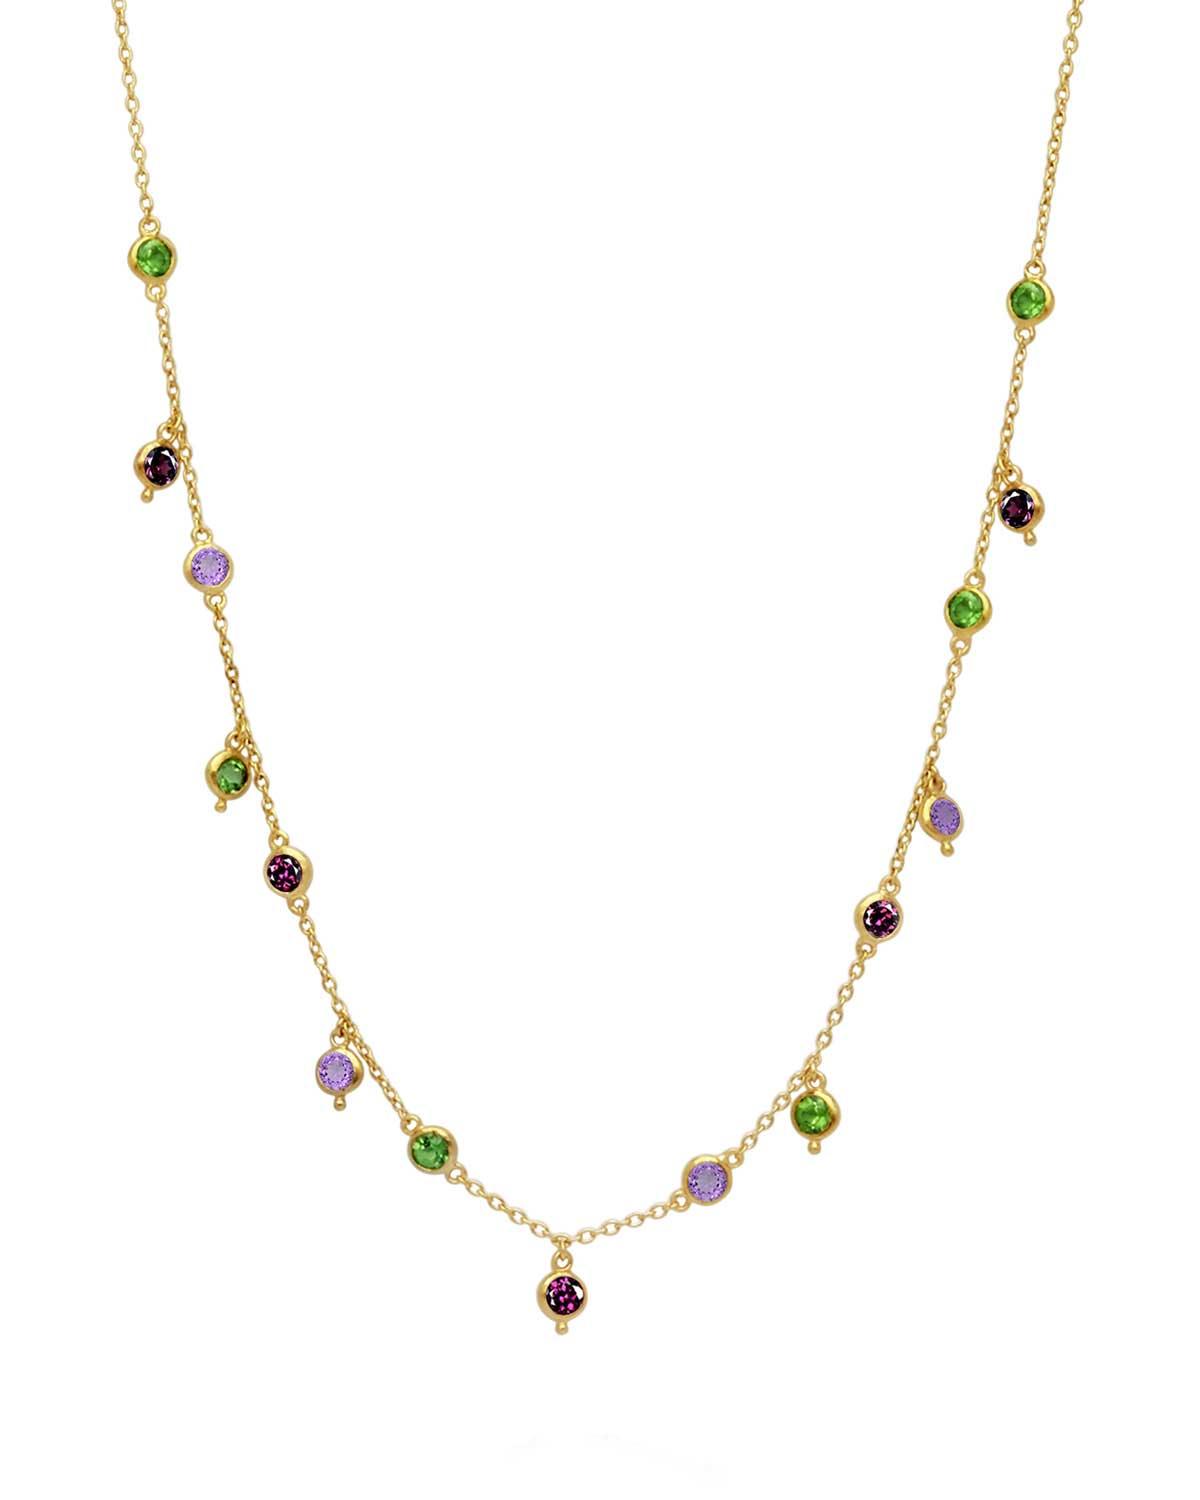 Contemporary Mix Gemstones Gold Necklace - Moon London